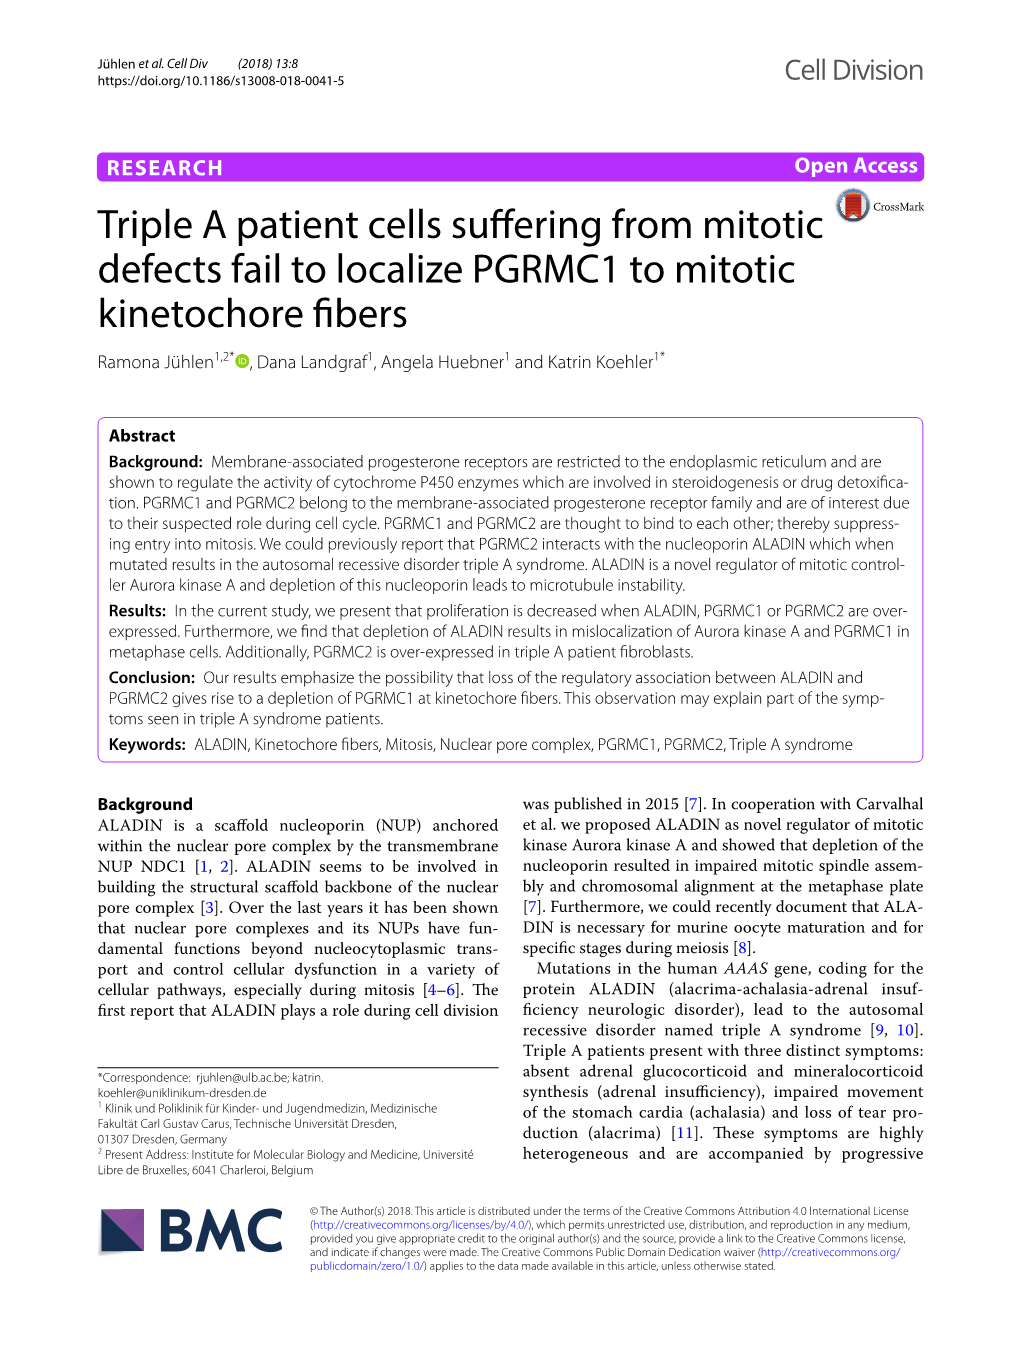 Triple a Patient Cells Suffering from Mitotic Defects Fail to Localize PGRMC1 to Mitotic Kinetochore Fibers